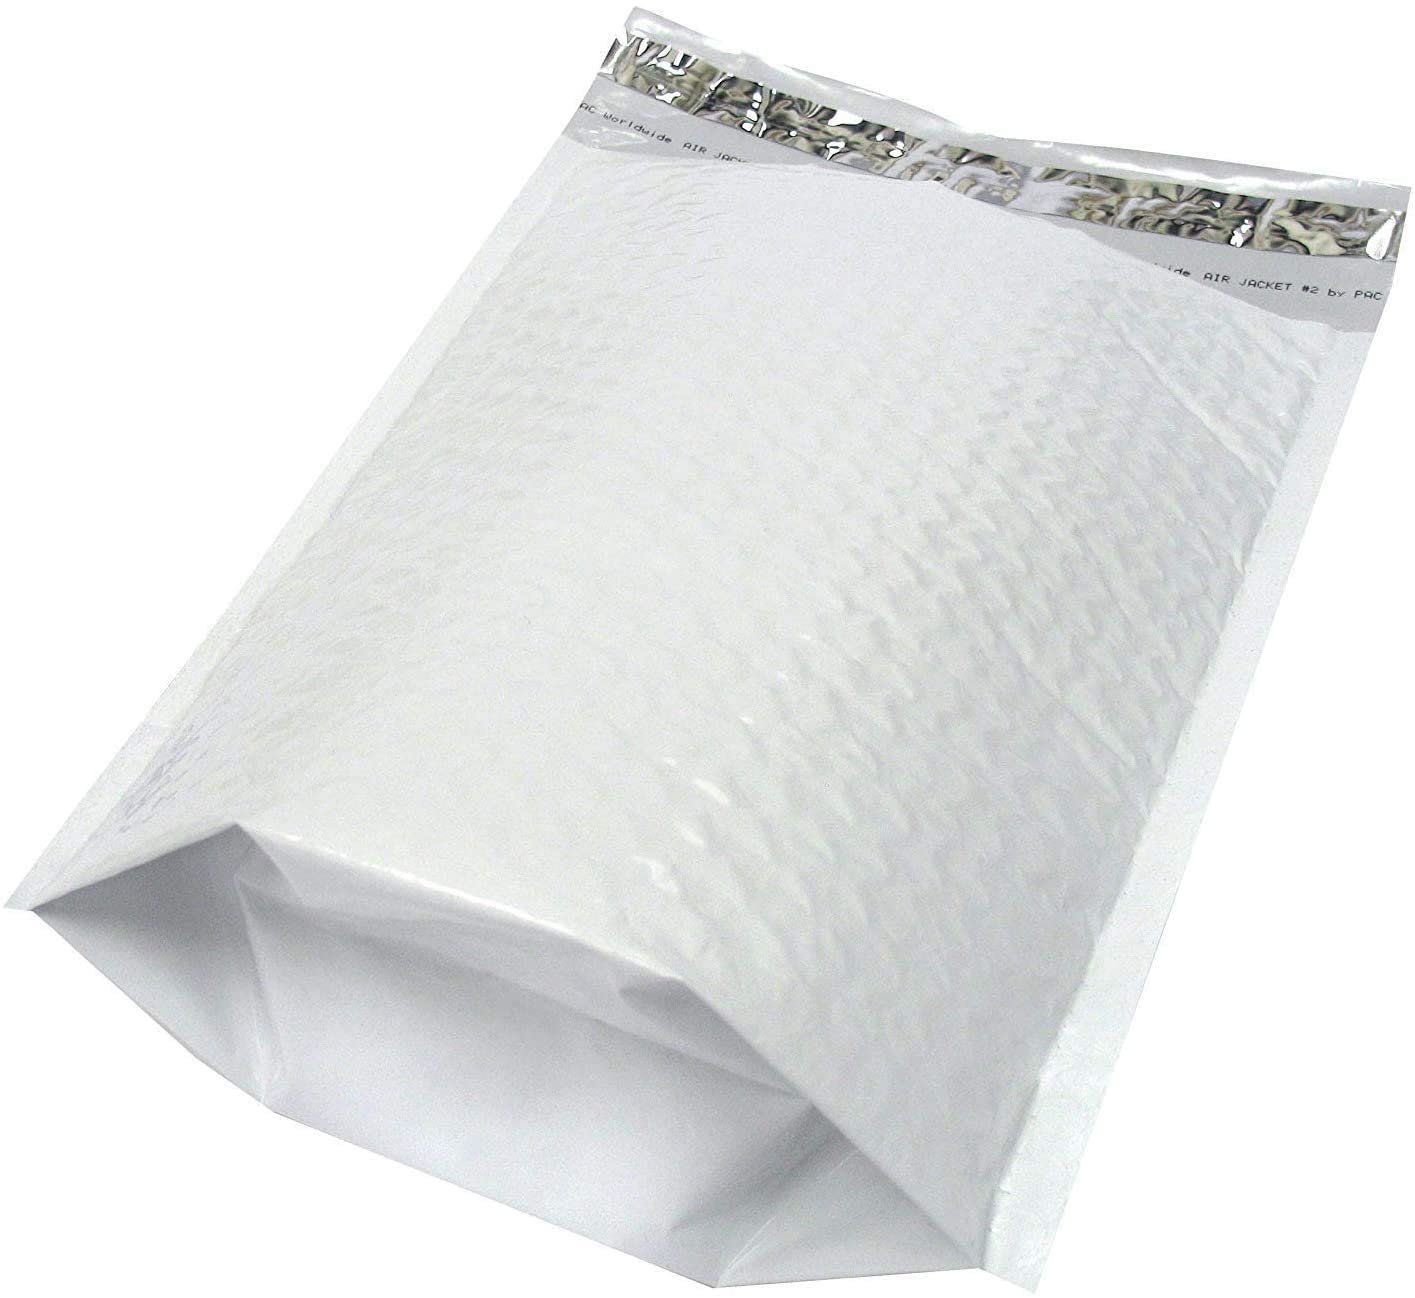 25 Large F/3 340mm x 220mm White Bubble Padded Post Bags Envelopes 